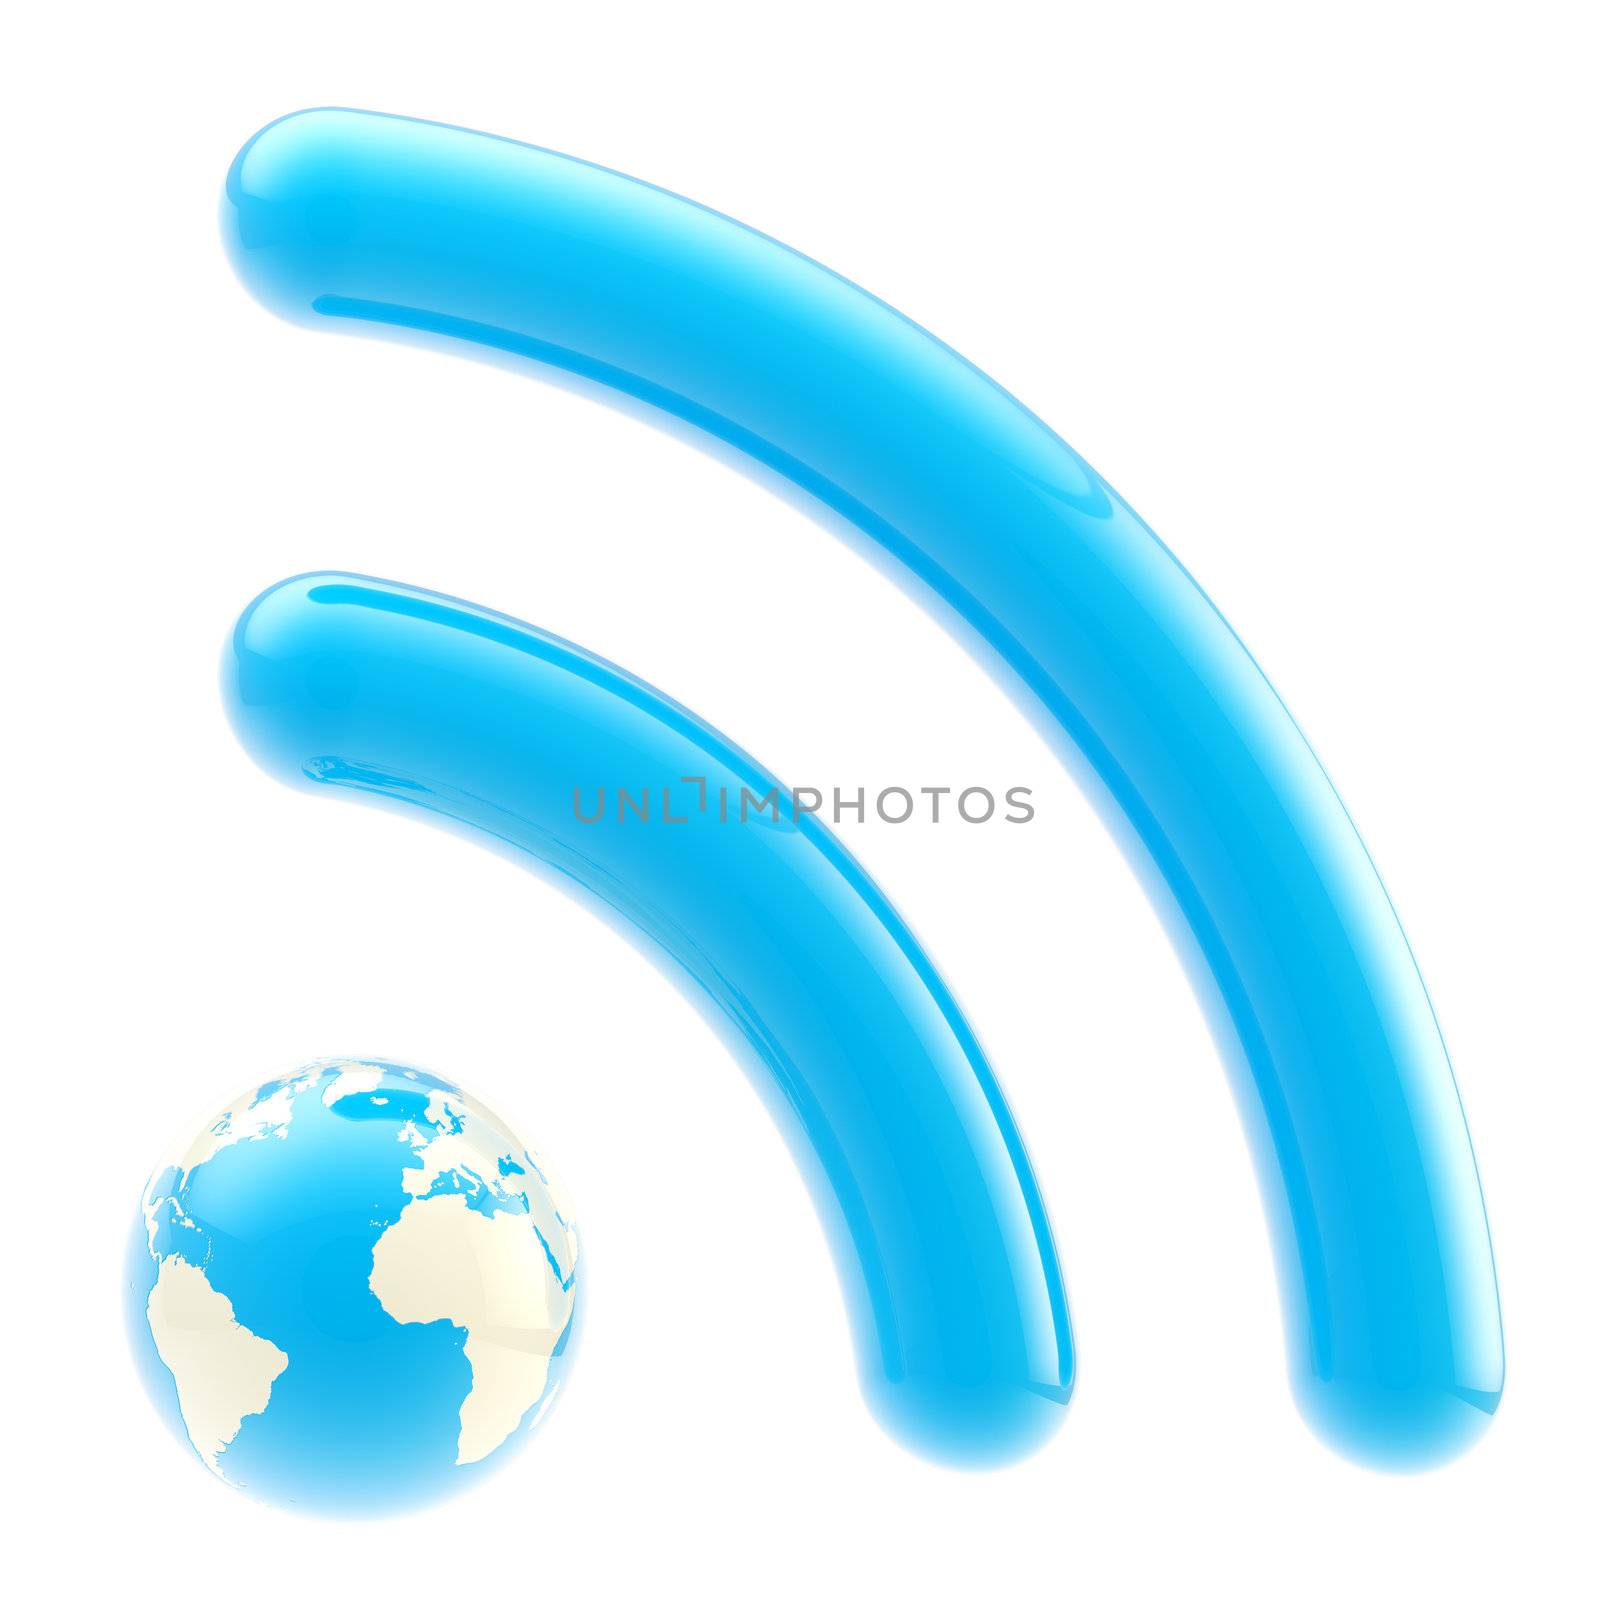 Earth planet like glossy blue RSS icon isolated on white